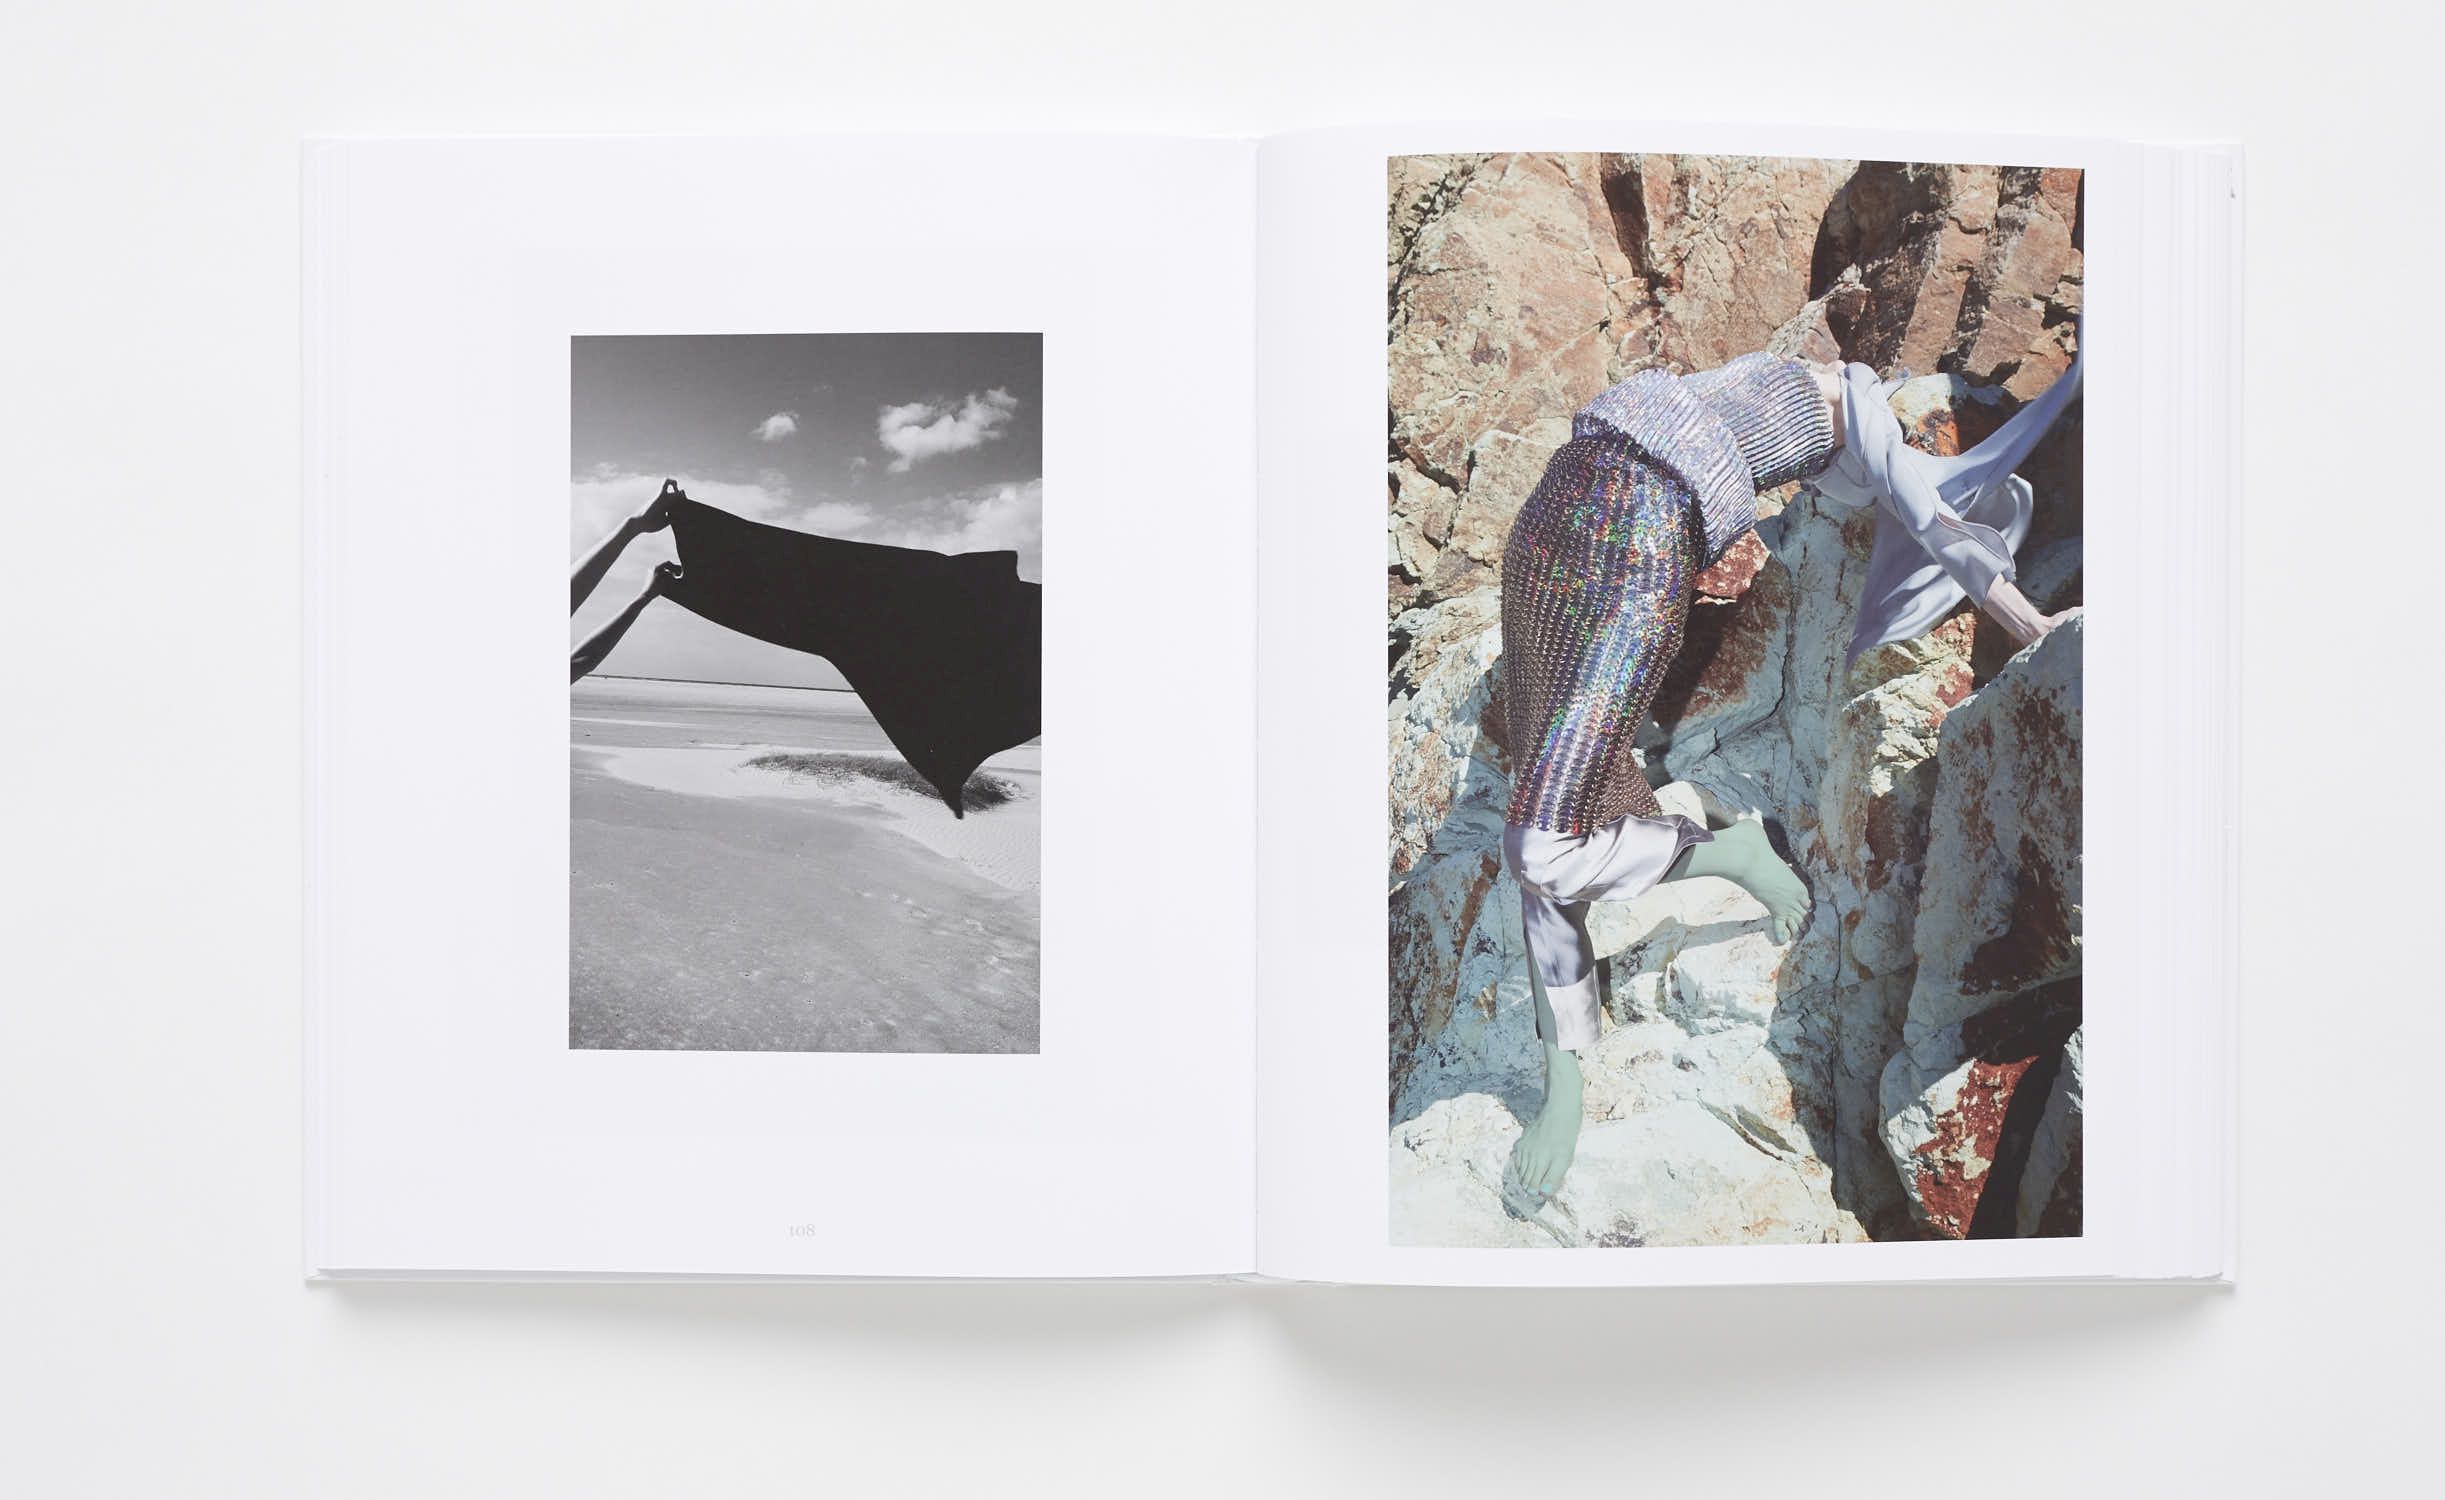 Viviane Sassen • In and Out of Fashion